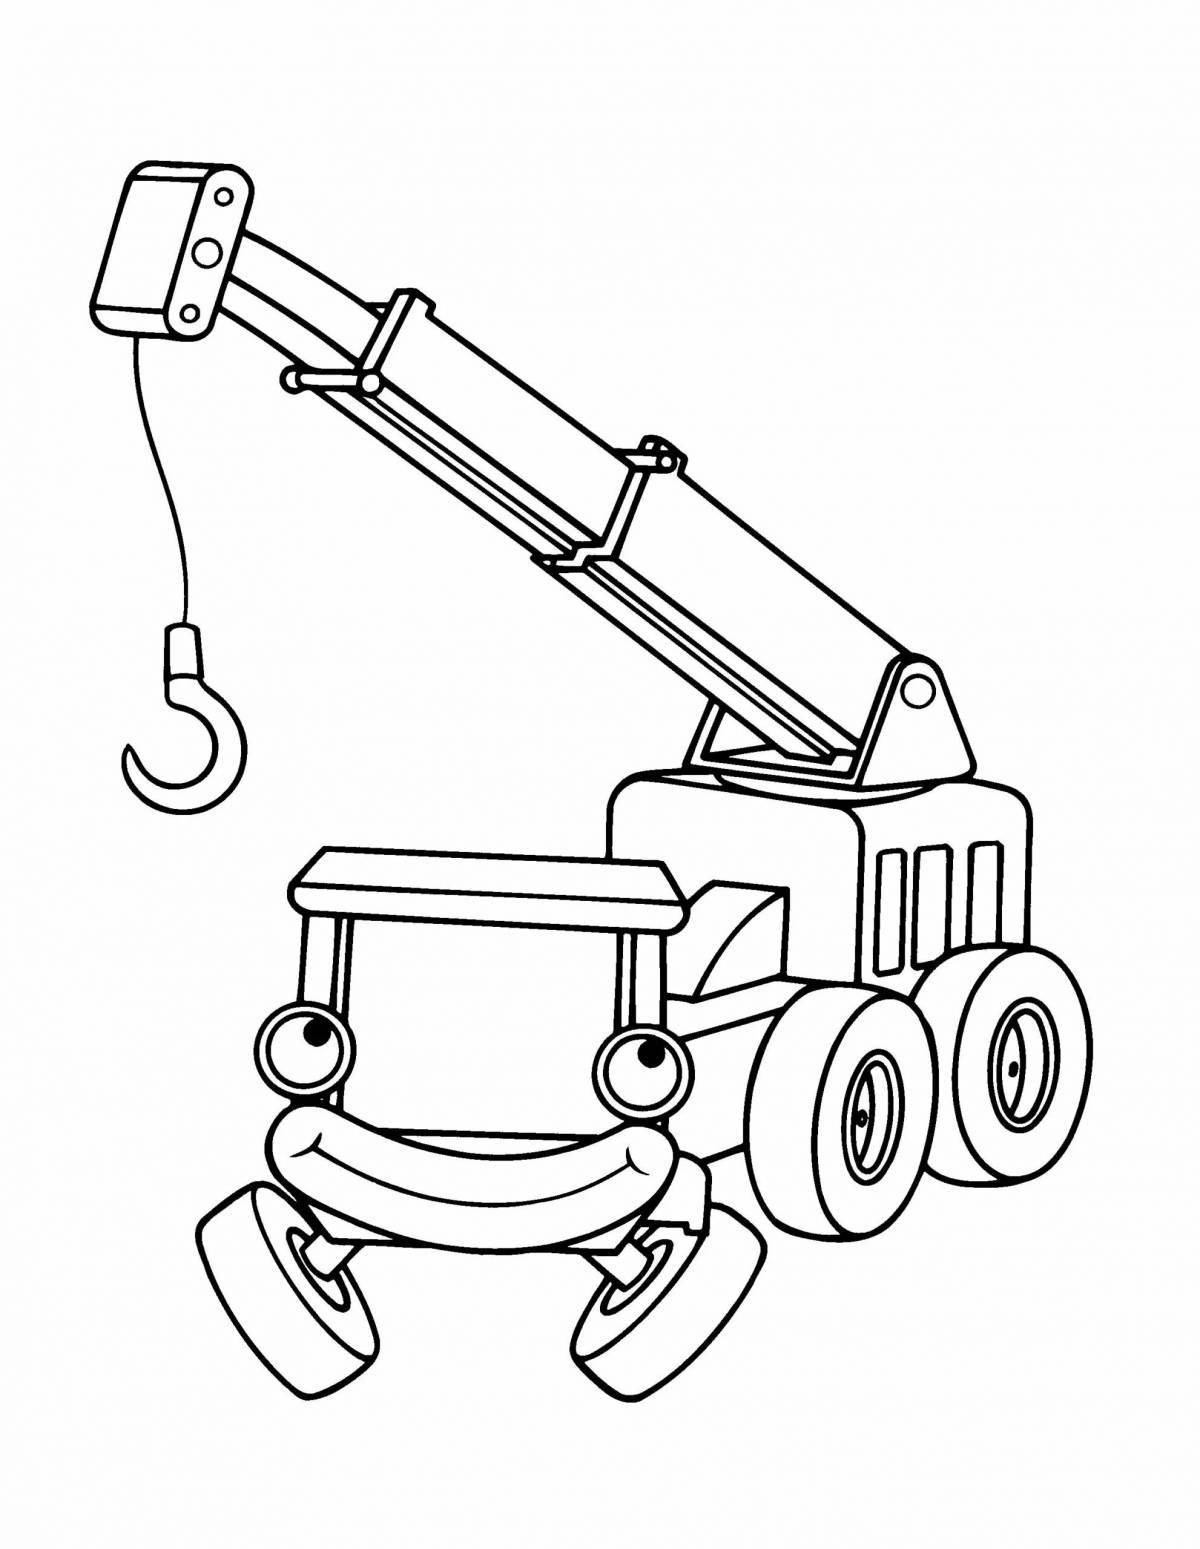 An entertaining coloring book crane for children 3-4 years old